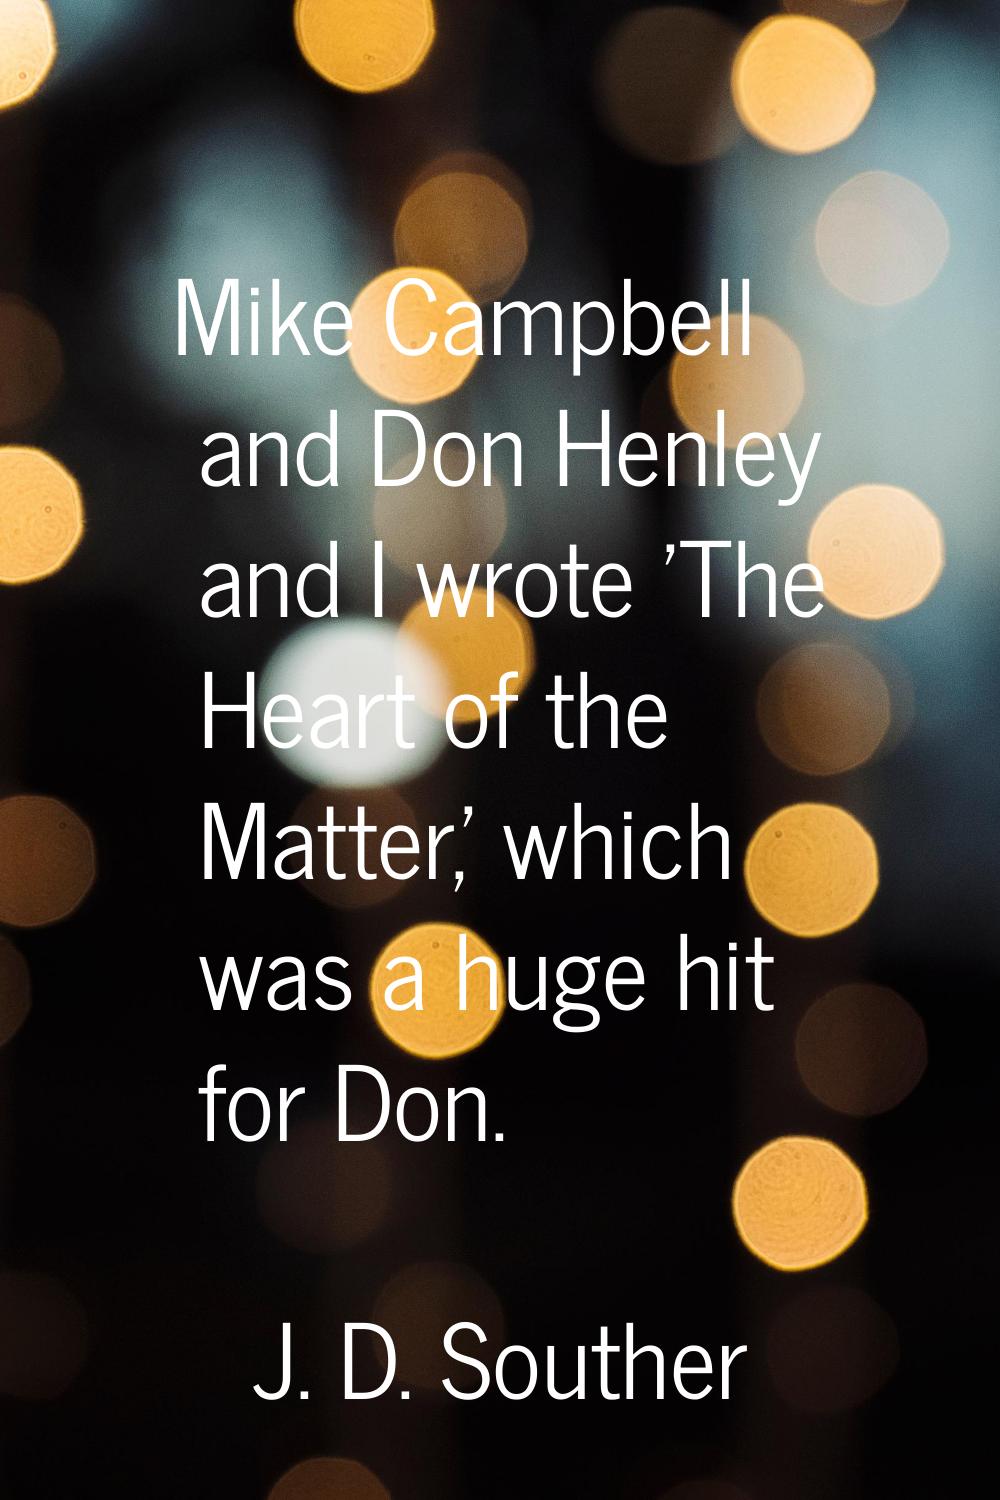 Mike Campbell and Don Henley and I wrote 'The Heart of the Matter,' which was a huge hit for Don.